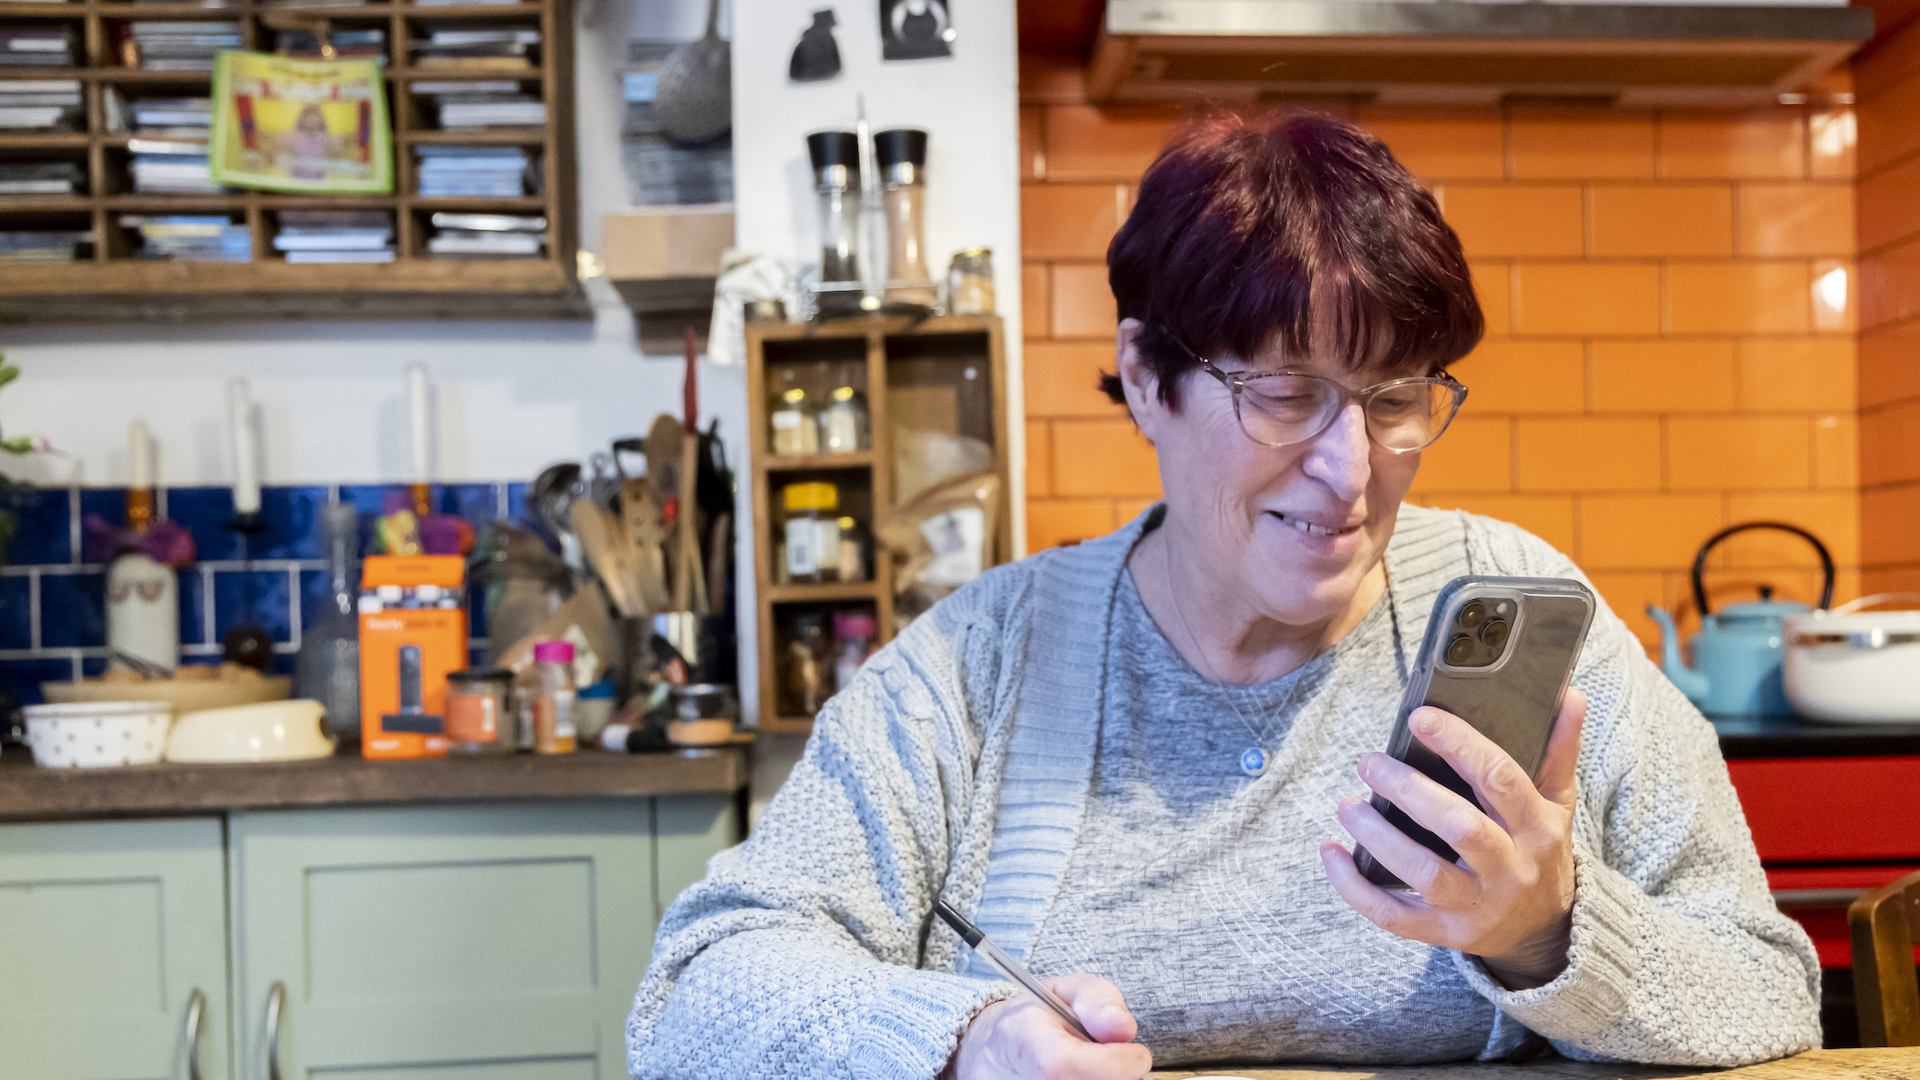 Older woman using phone in kitchen